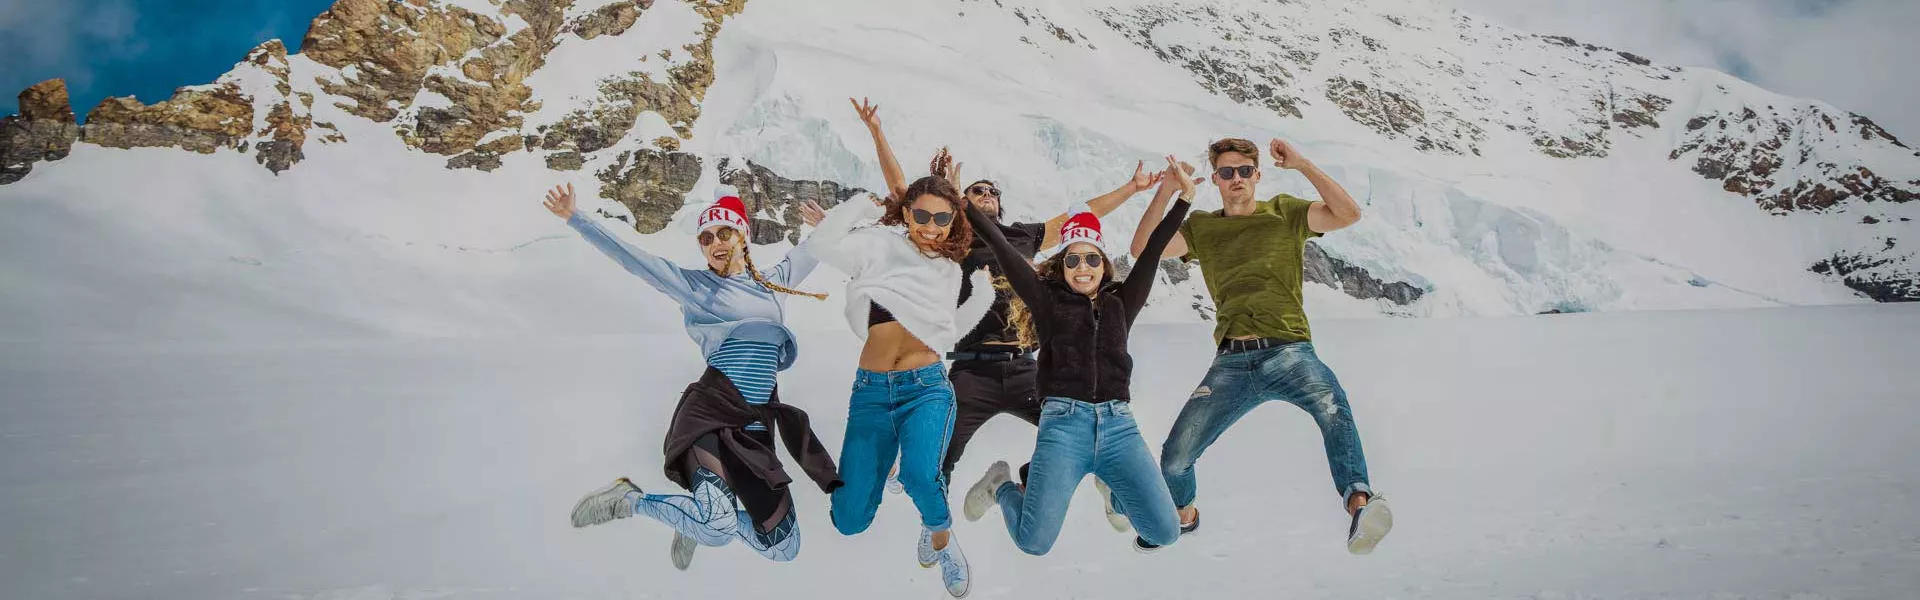 Group Jumping Together In The Snowy Mountains